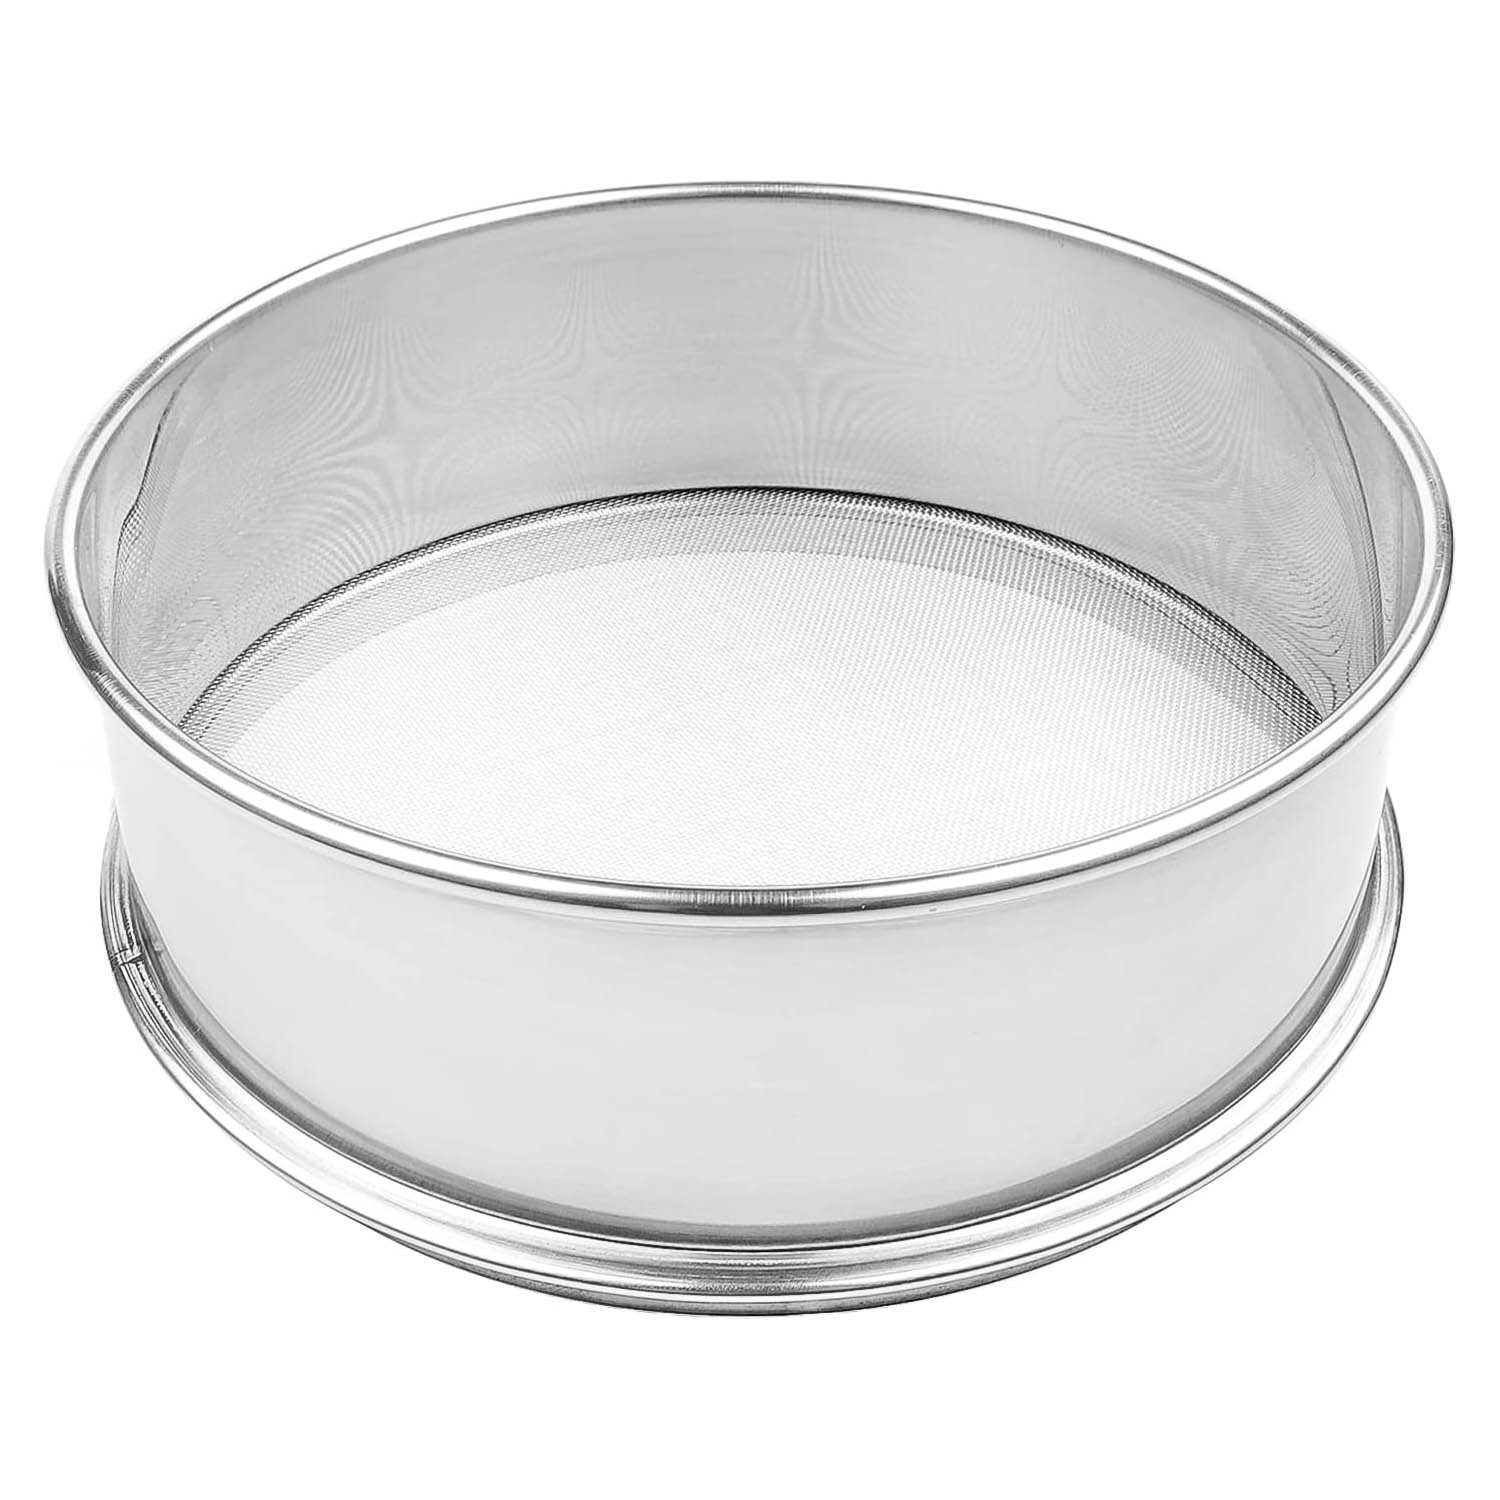 Stainless Steel Flour Sifter (Great for Smoking Salt & Spices!)